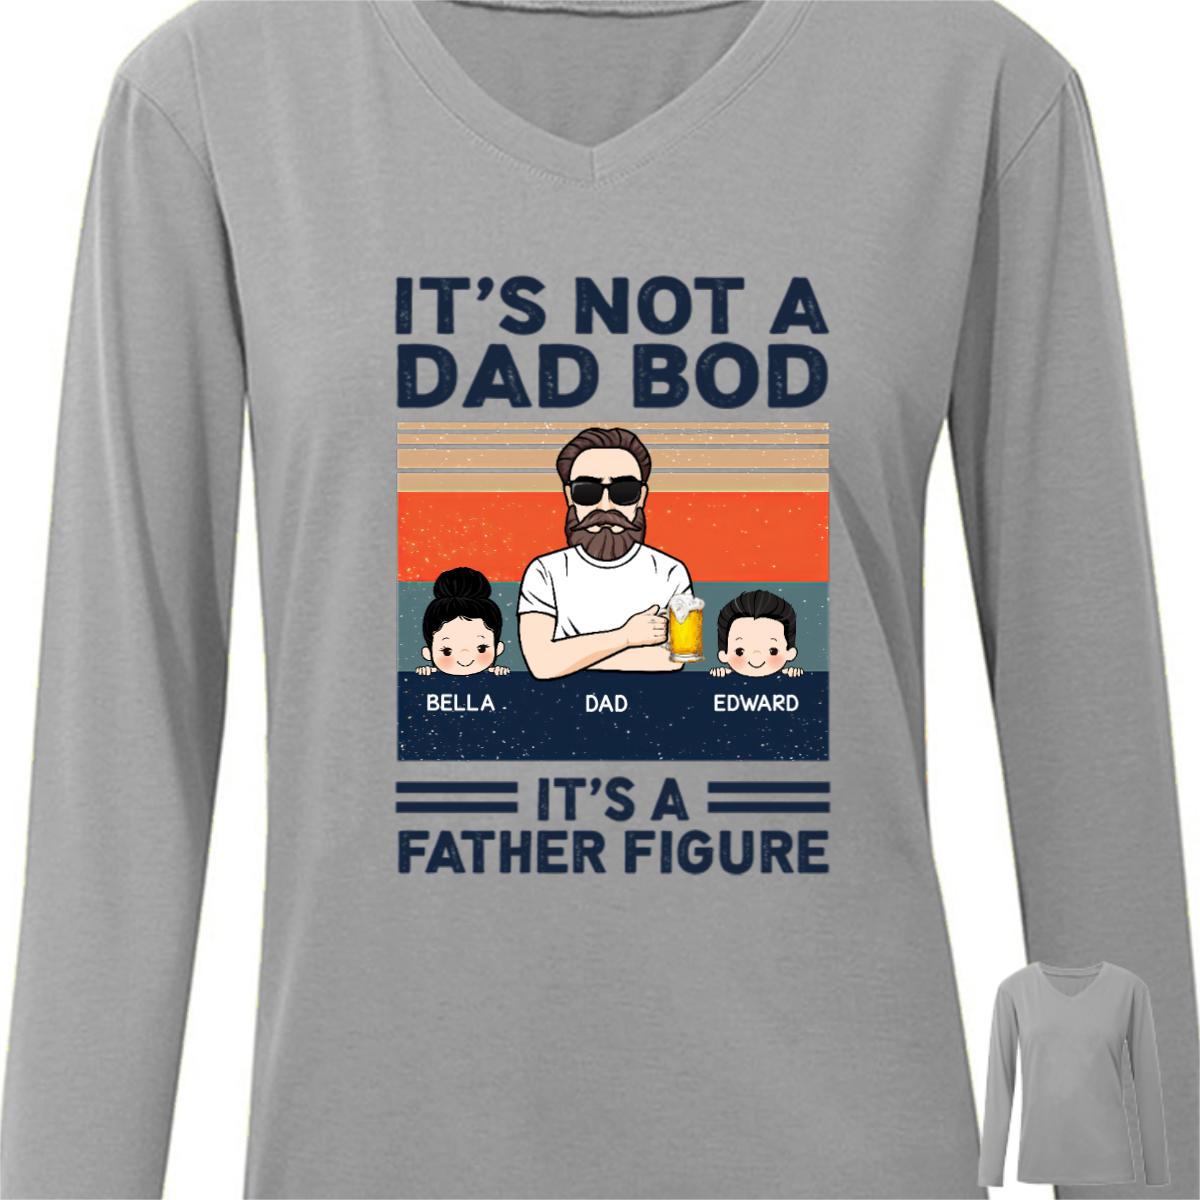 Not Dad Bod Father Figure Personalized Long Sleeve Shirt